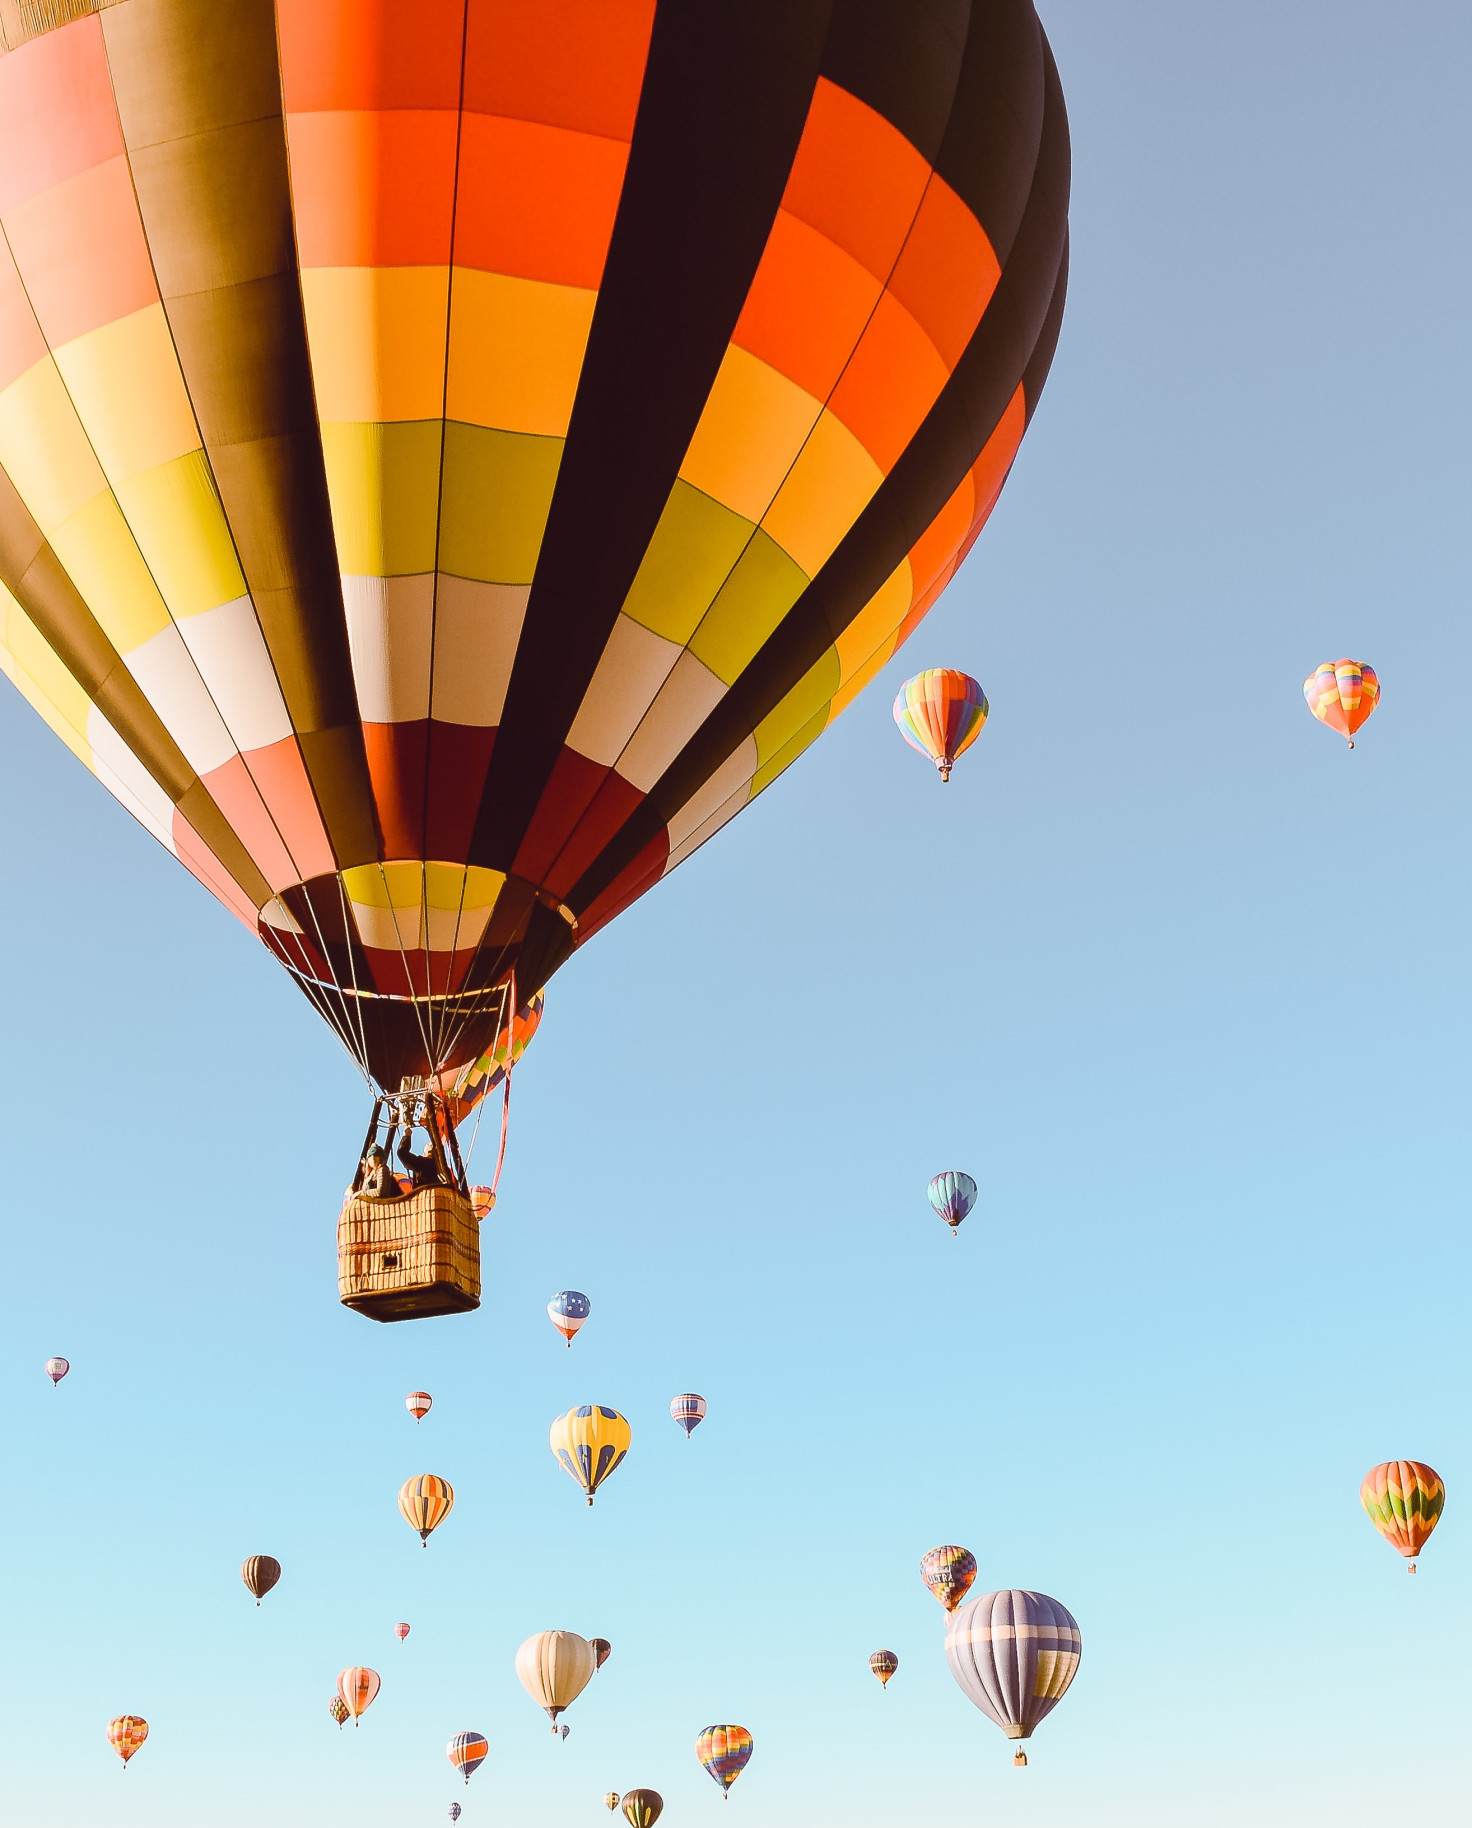 Red, yellow, white, orange, and black hot air balloon floats in the sky with other hot air balloons in the background in a clear blue sky